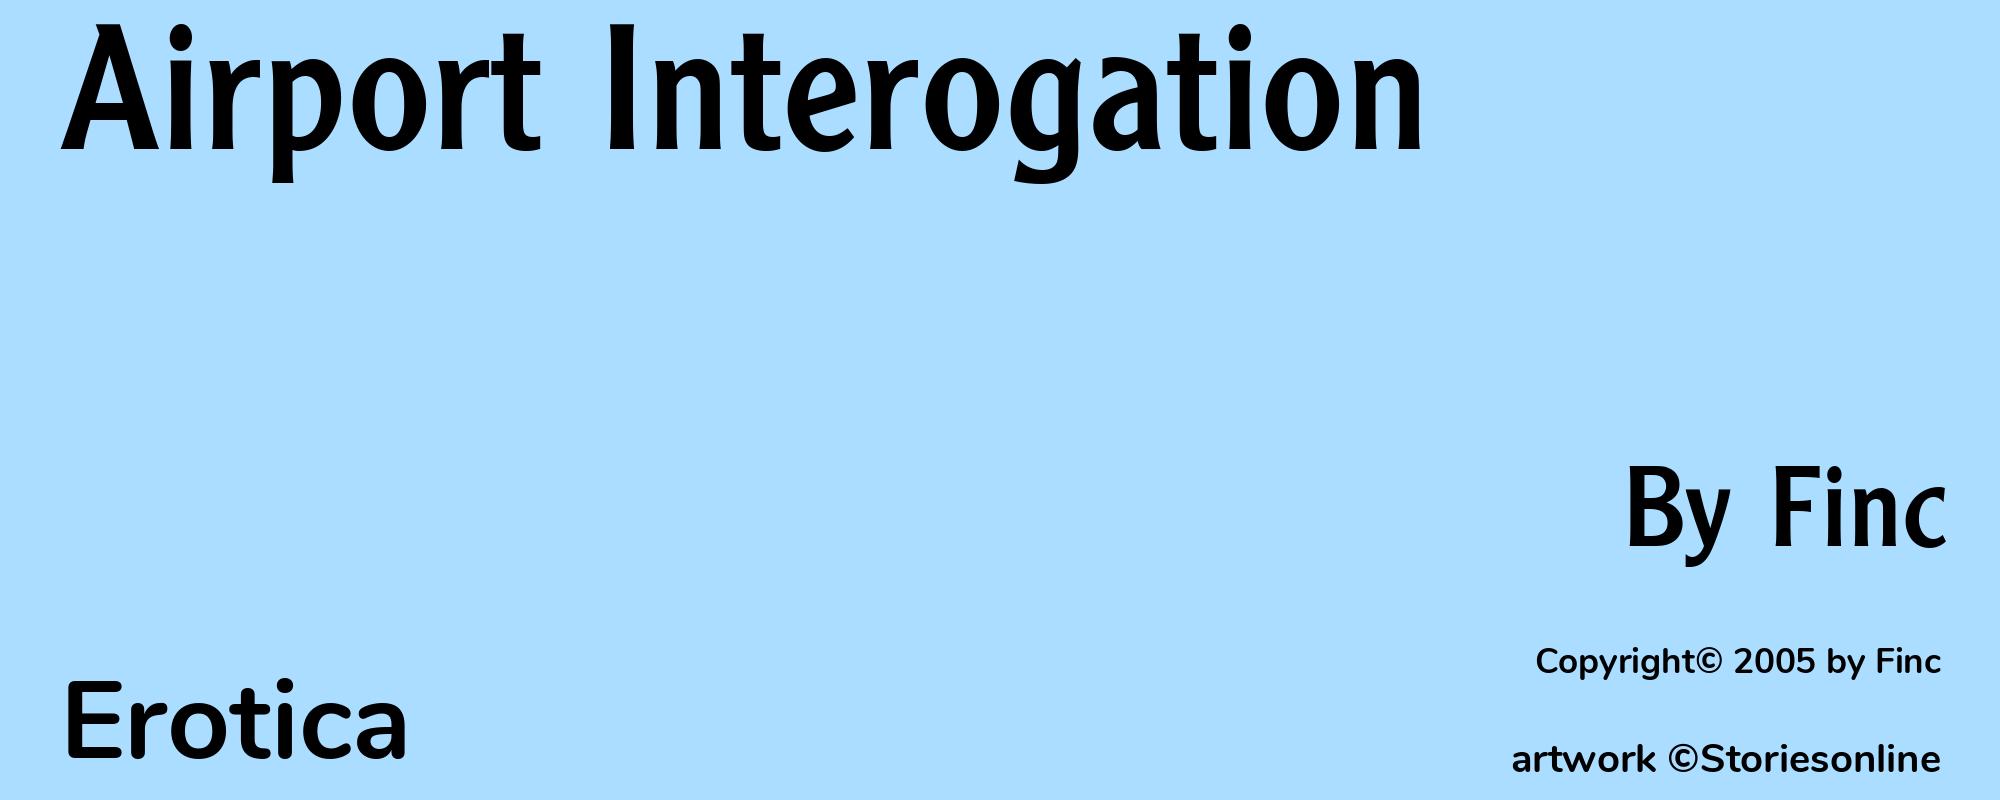 Airport Interogation - Cover